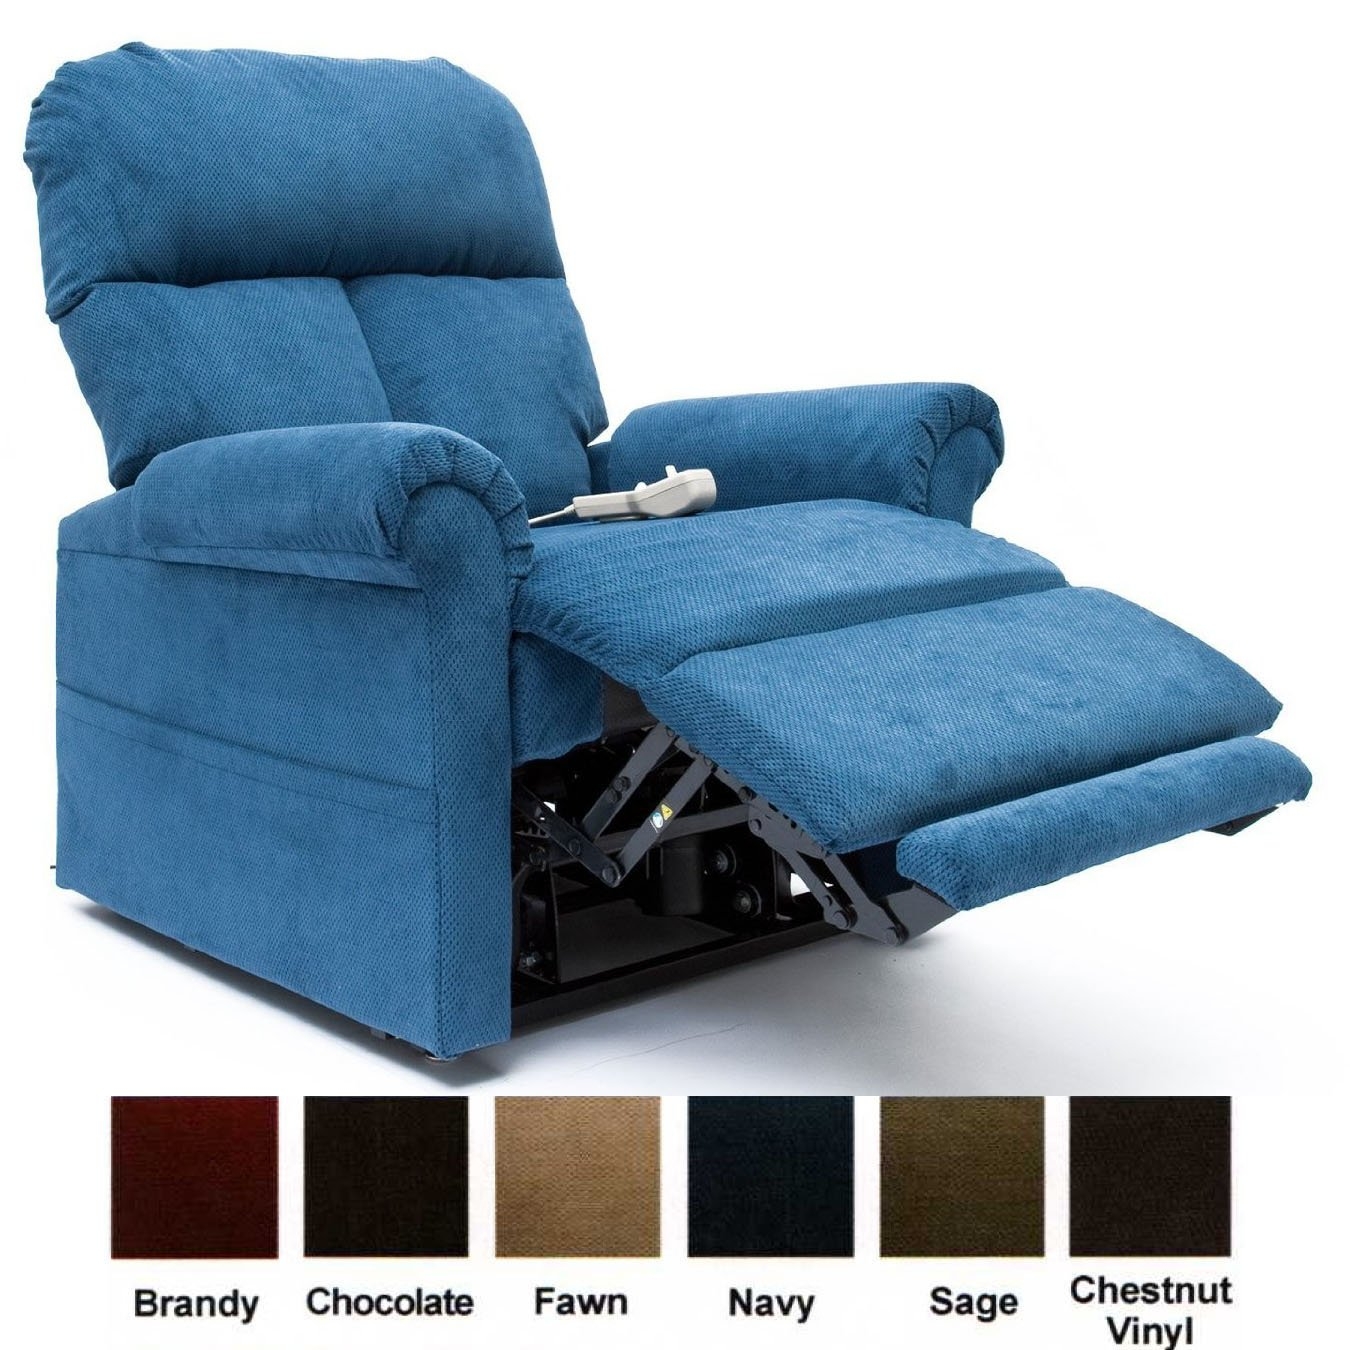 Mega Motion Power Easy Comfort Lift Chair Recliner LC-100 Infinite Position Rising Electric Chaise Lounger - Navy Blue Color Fabric